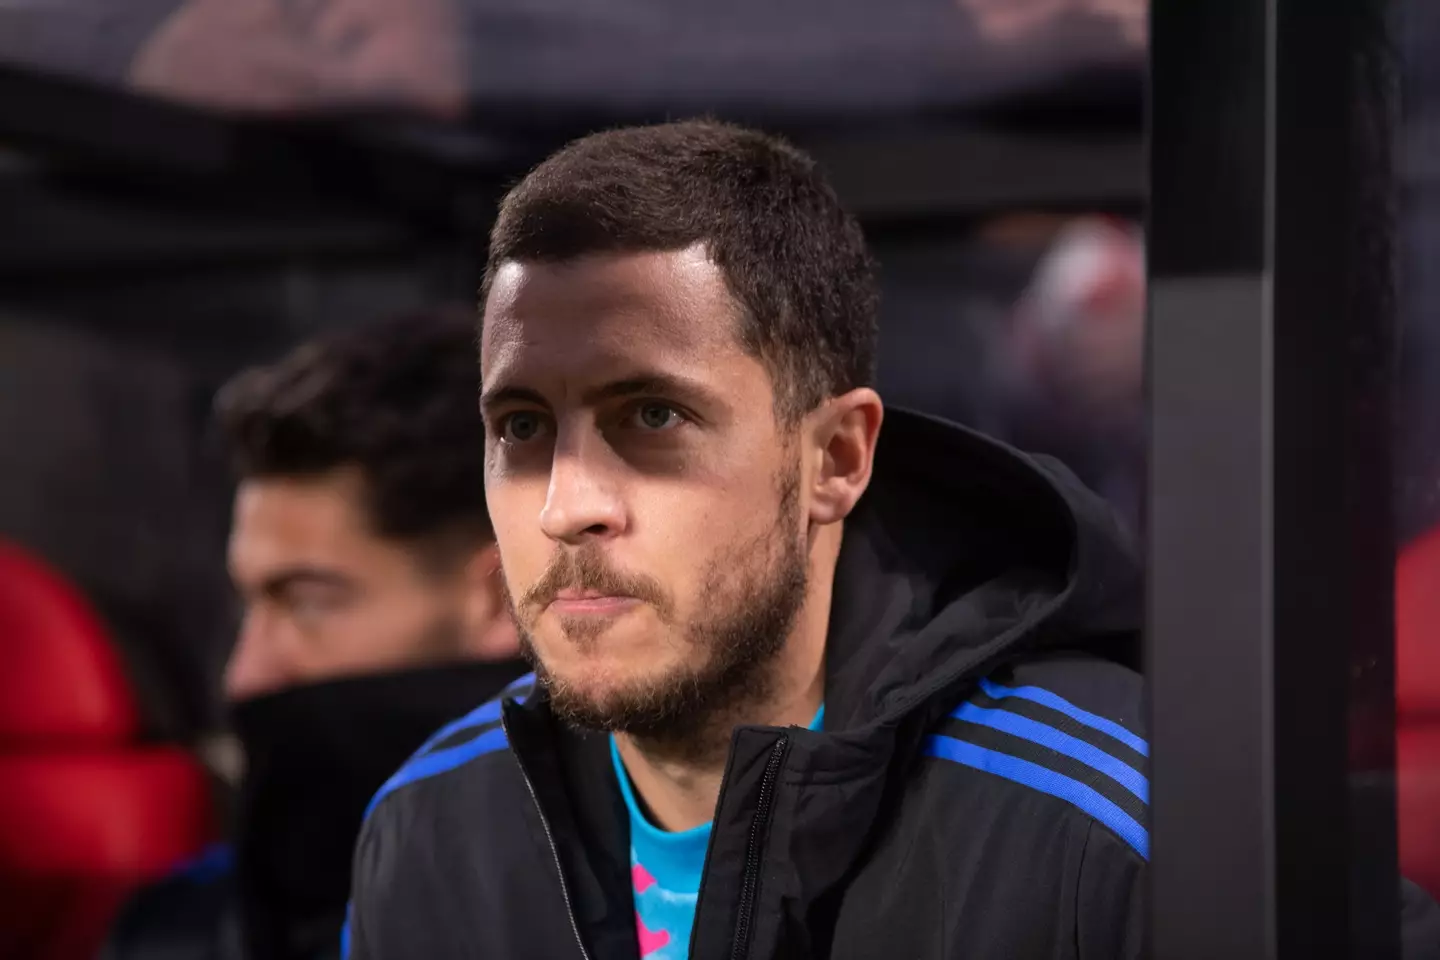 Hazard hasn't had the best time since moving to Real Madrid.